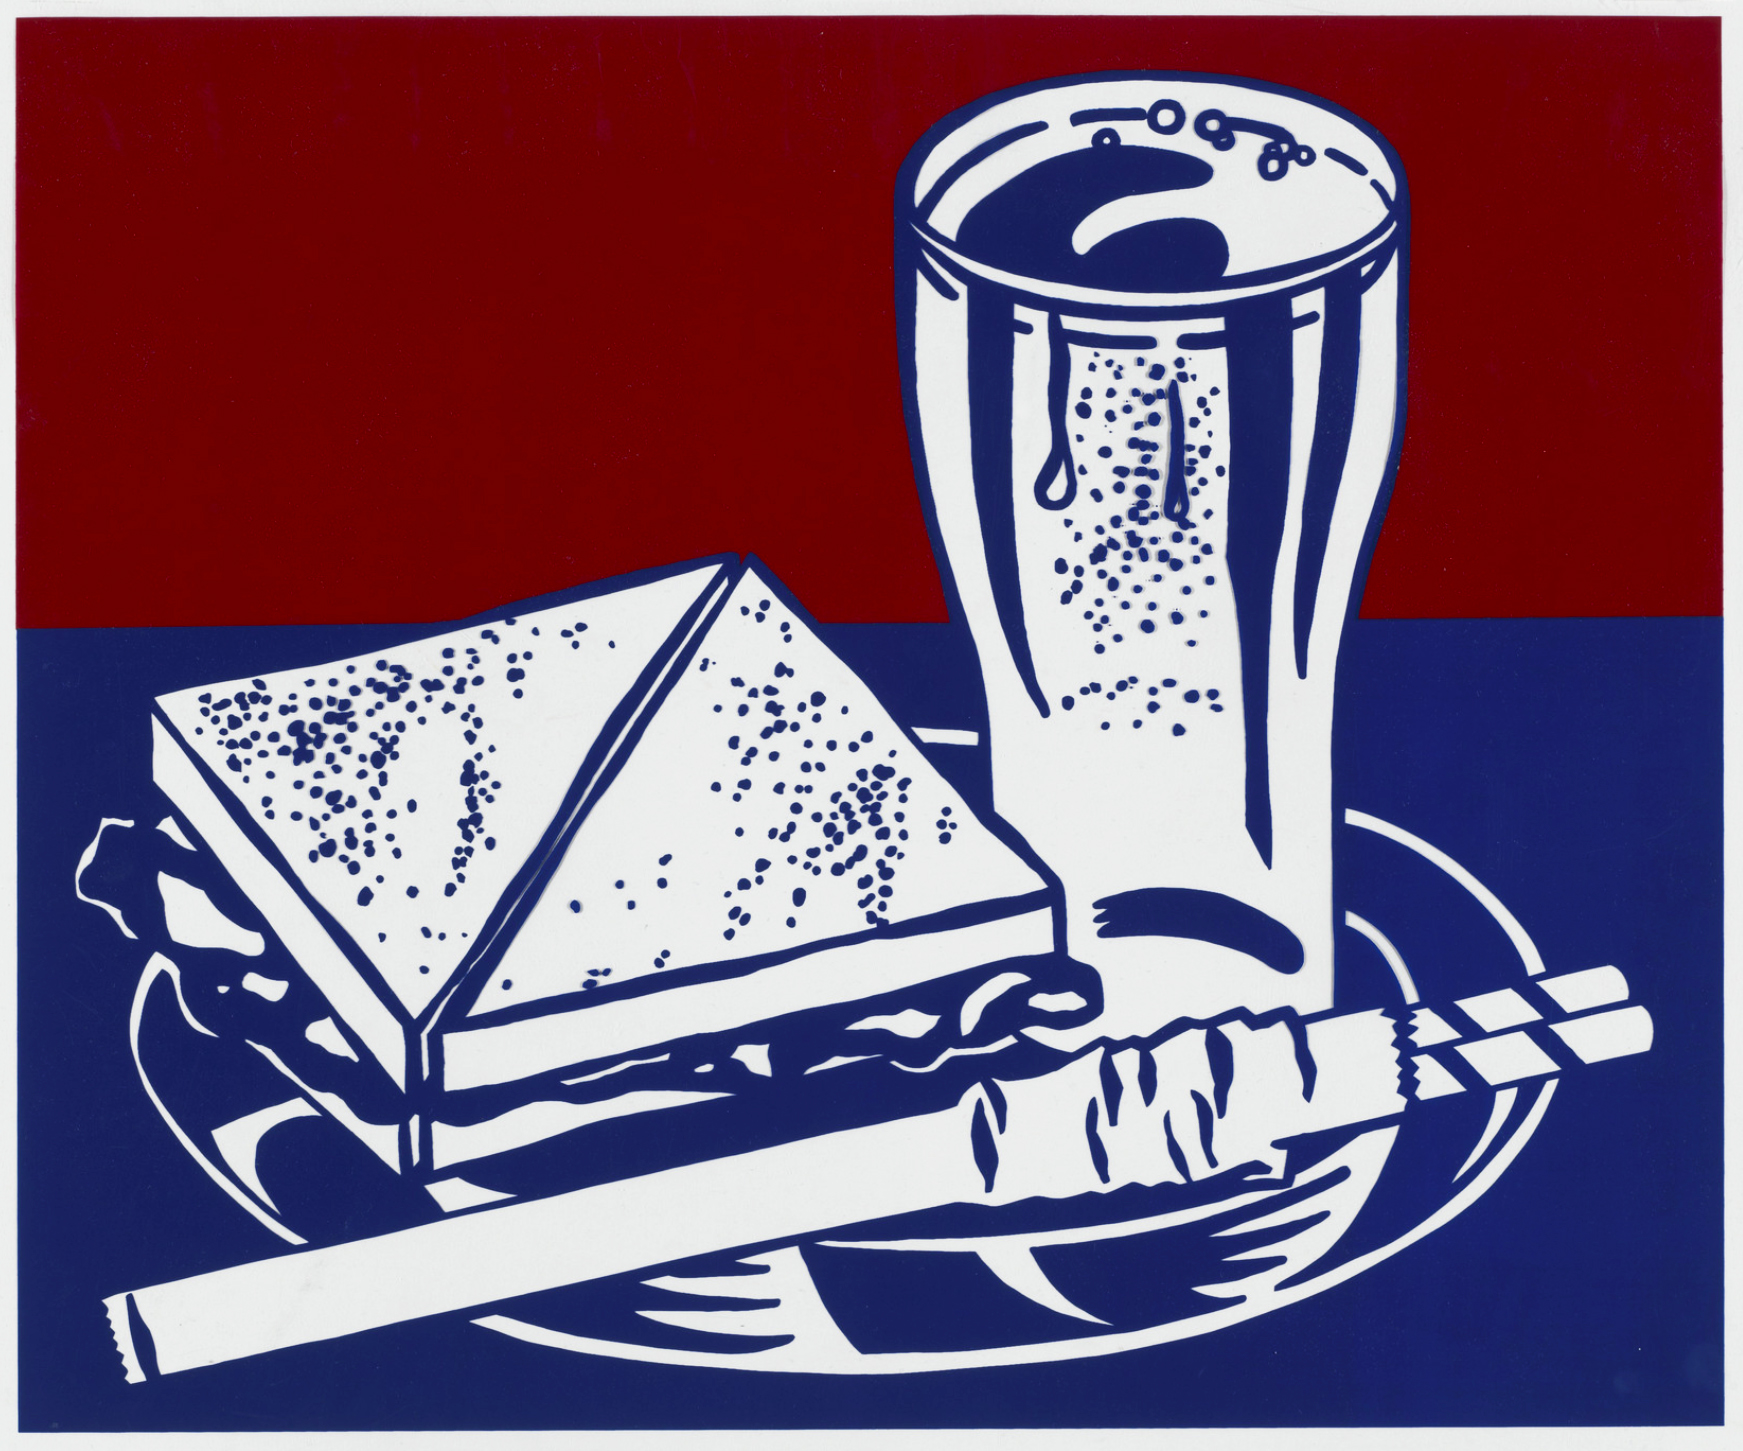 Graphic artwork by Roy Lichtenstein titled 'Sandwich and Soda' from the series 'X + X (Ten Works by Ten Painters)' created in 1964. The image features a bold, stylized depiction of a sandwich and a glass of soda in Lichtenstein's signature pop art style, using primary colors of red, white, and blue with characteristic dot patterns. The sandwich, placed on the left, has layers with visible speckling, while the soda glass, on the right, contains bubbles and is depicted in a white and blue color palette against a vibrant red background.